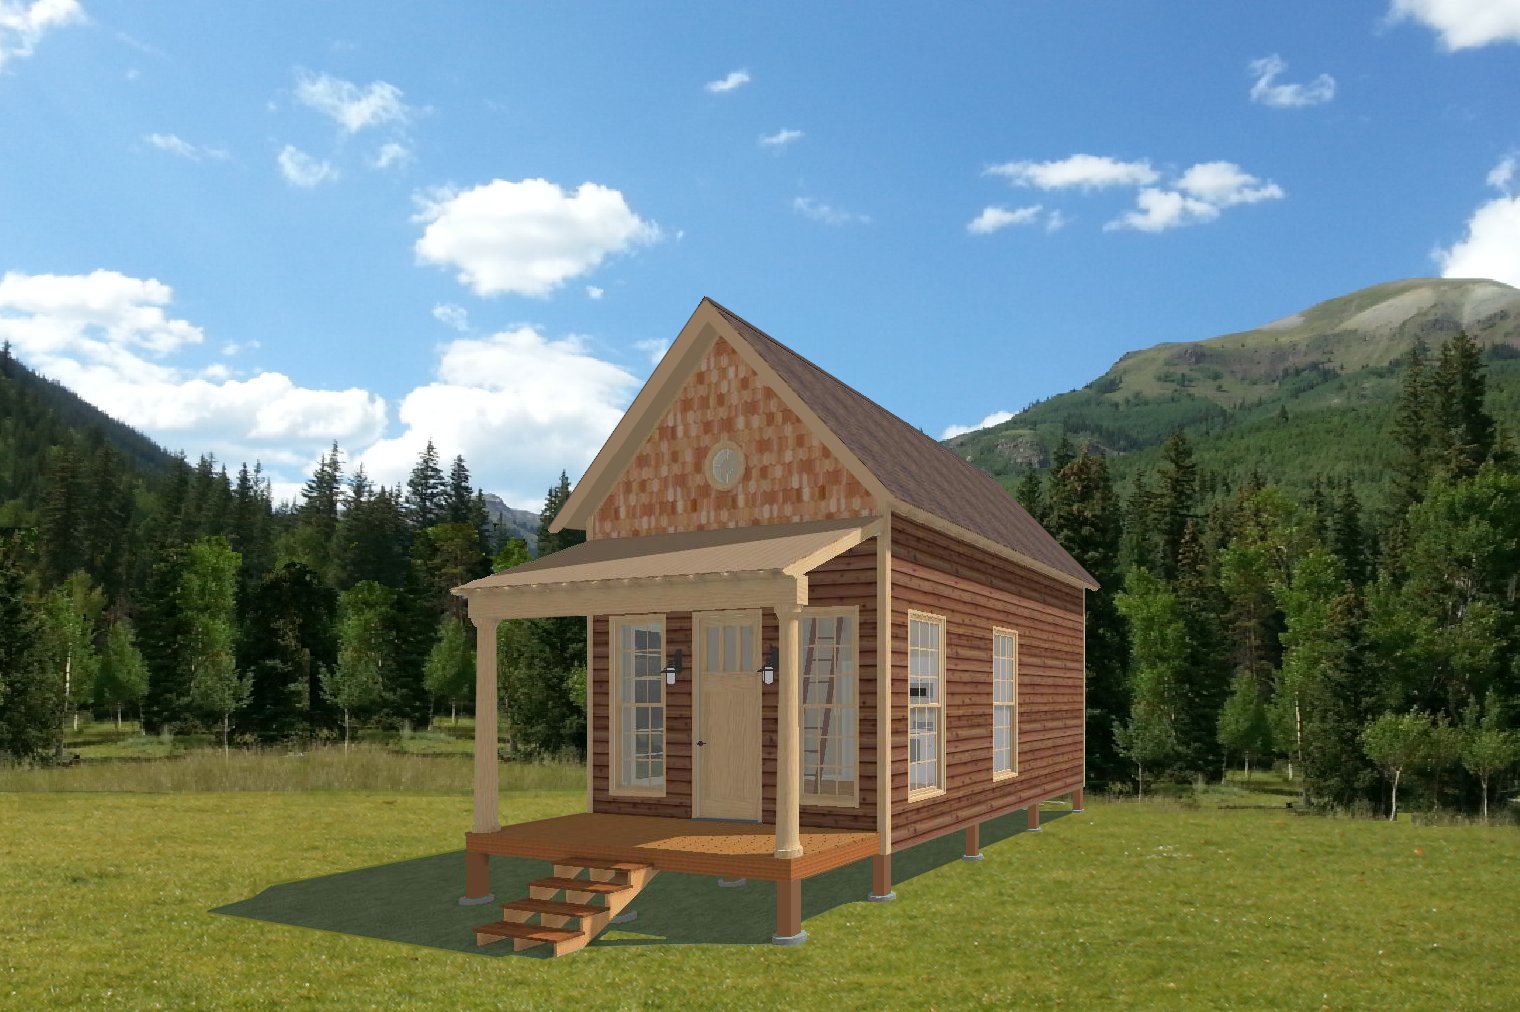 Tiny Homes, Small Homes, Little House Texas, Tiny House Plans, Small Home Plans, Micro Home Plans, Tiny Homes Builders Texas, Small Home Builders, Tiny Houses Plans